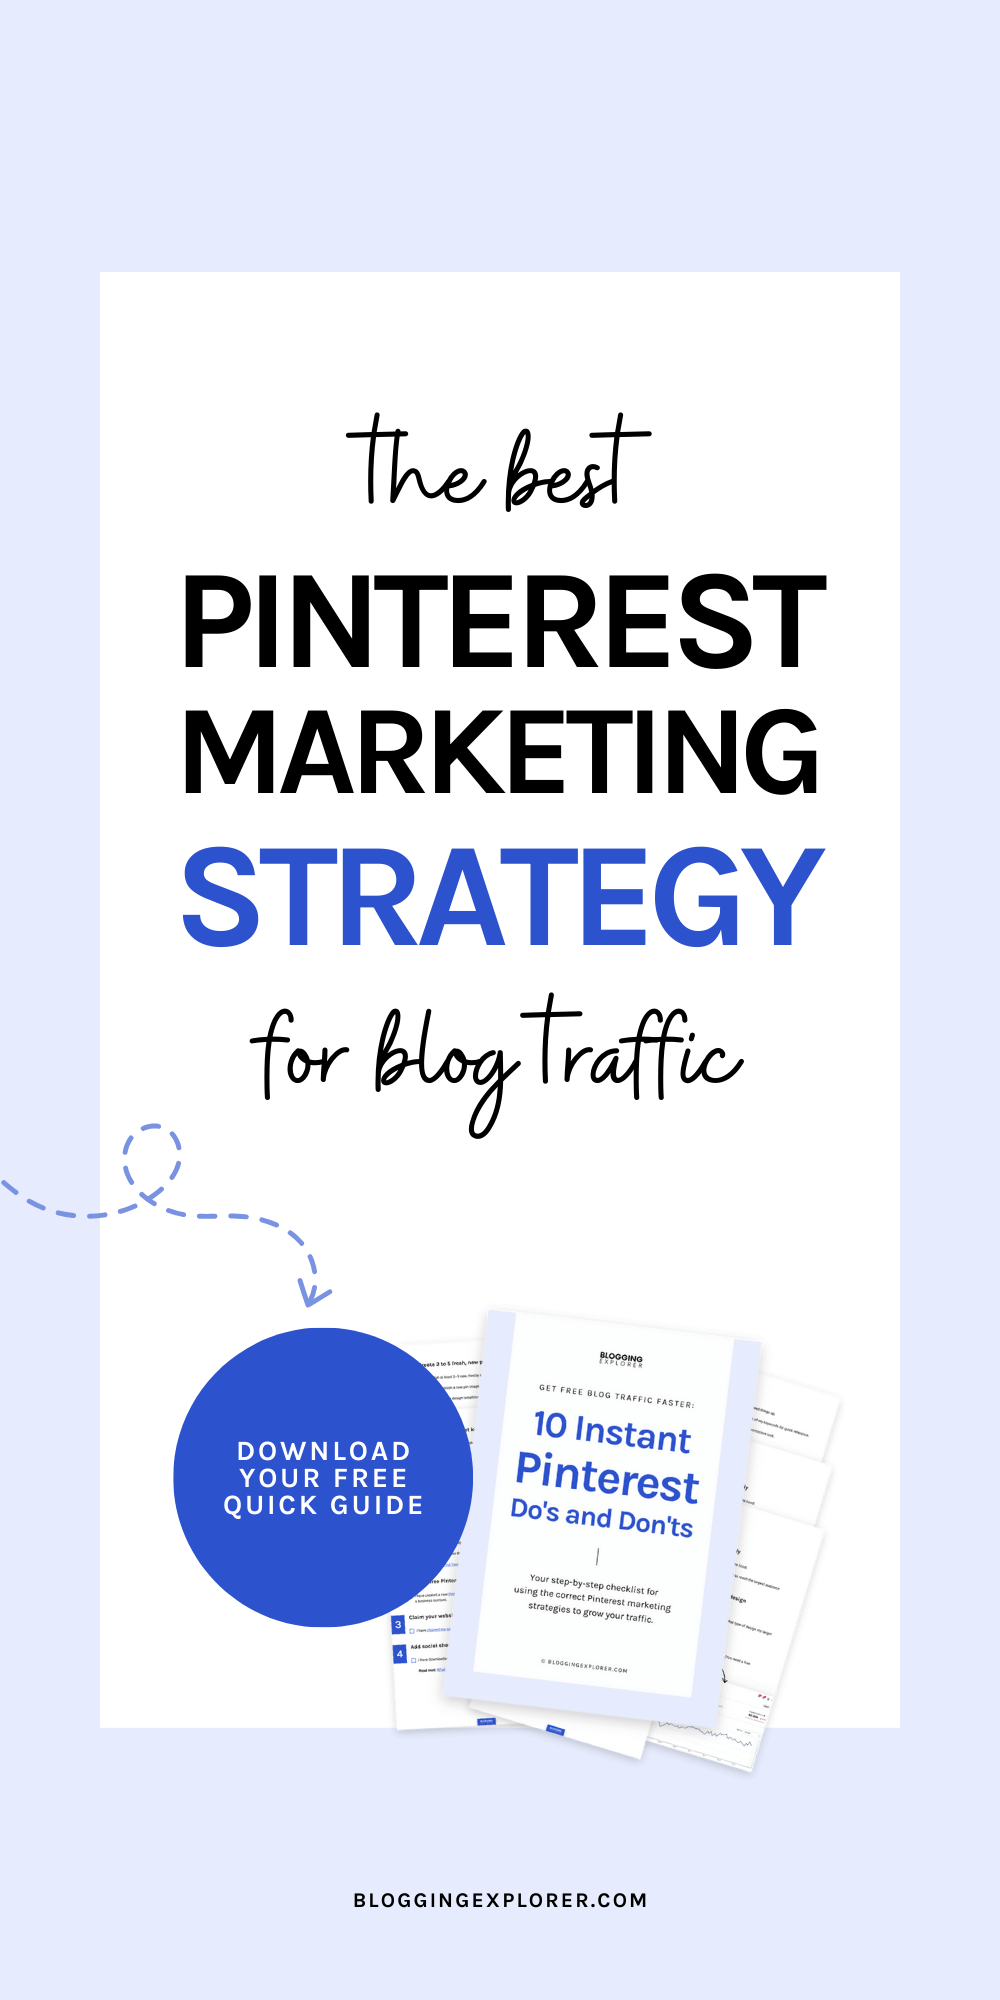 Pinterest marketing strategy guide – Learn how to drive free traffic to your blog and website from Pinterest